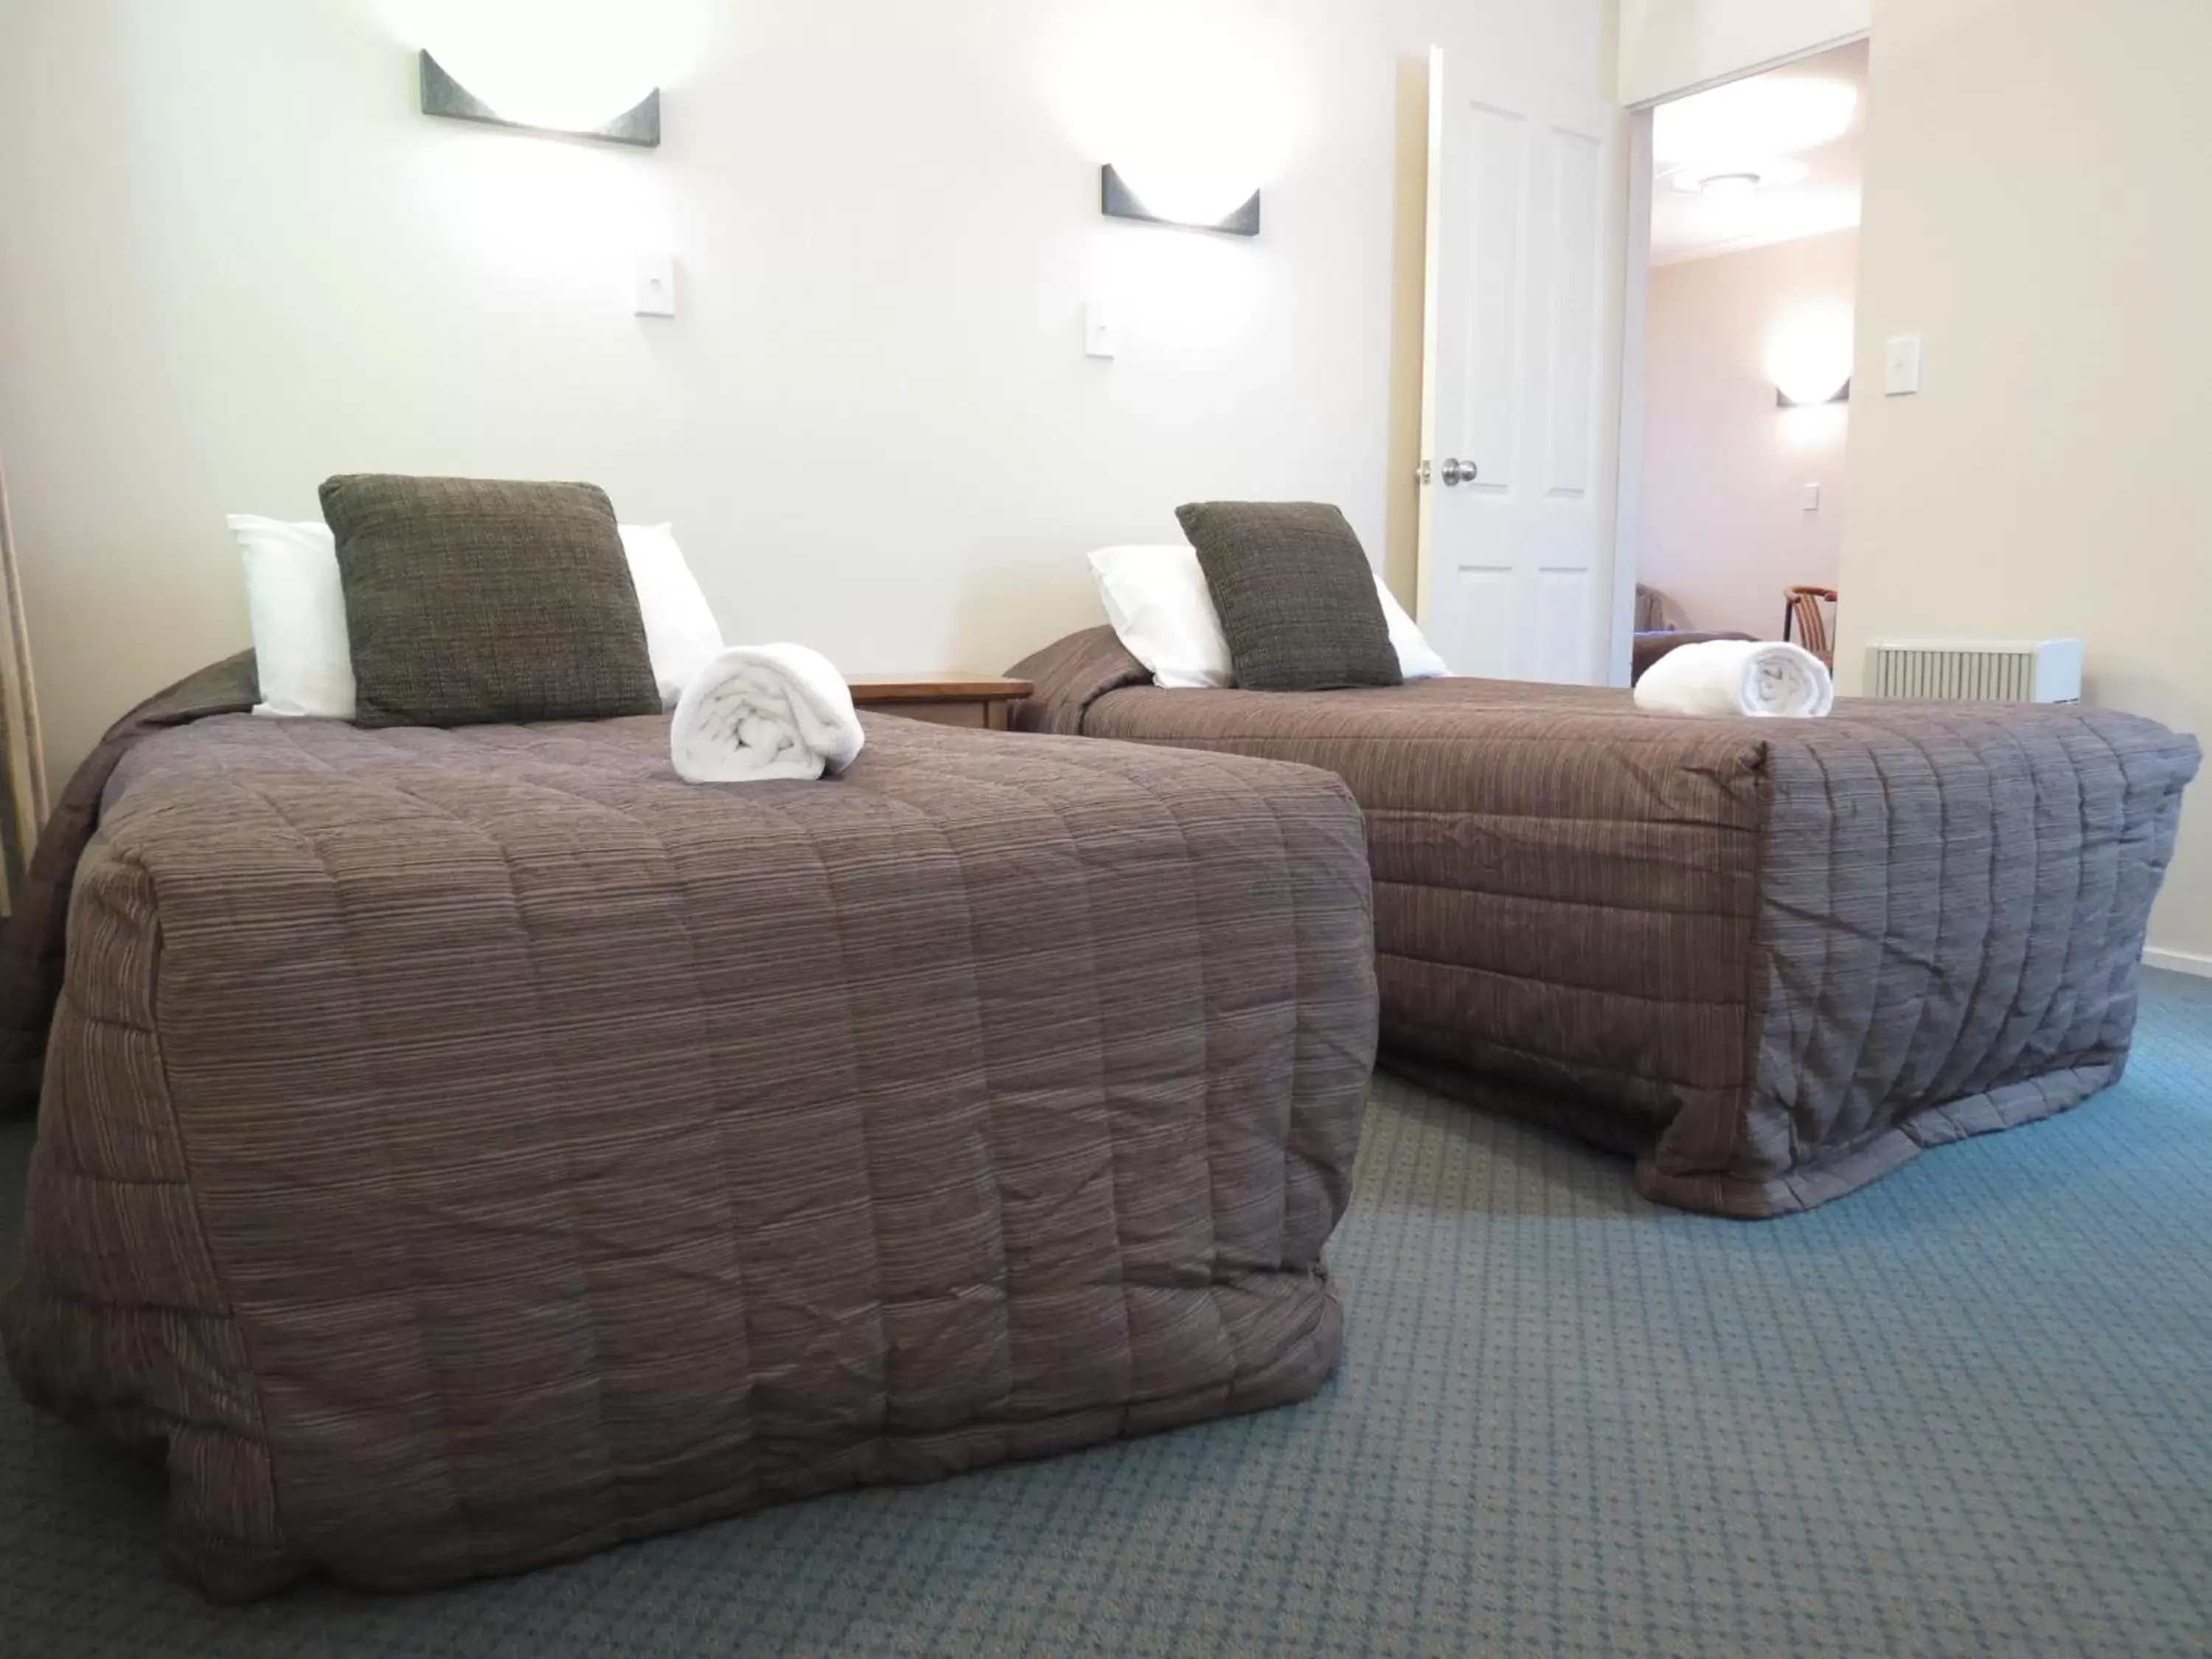 Family Room in Distinction Coachman Hotel, Palmerston North